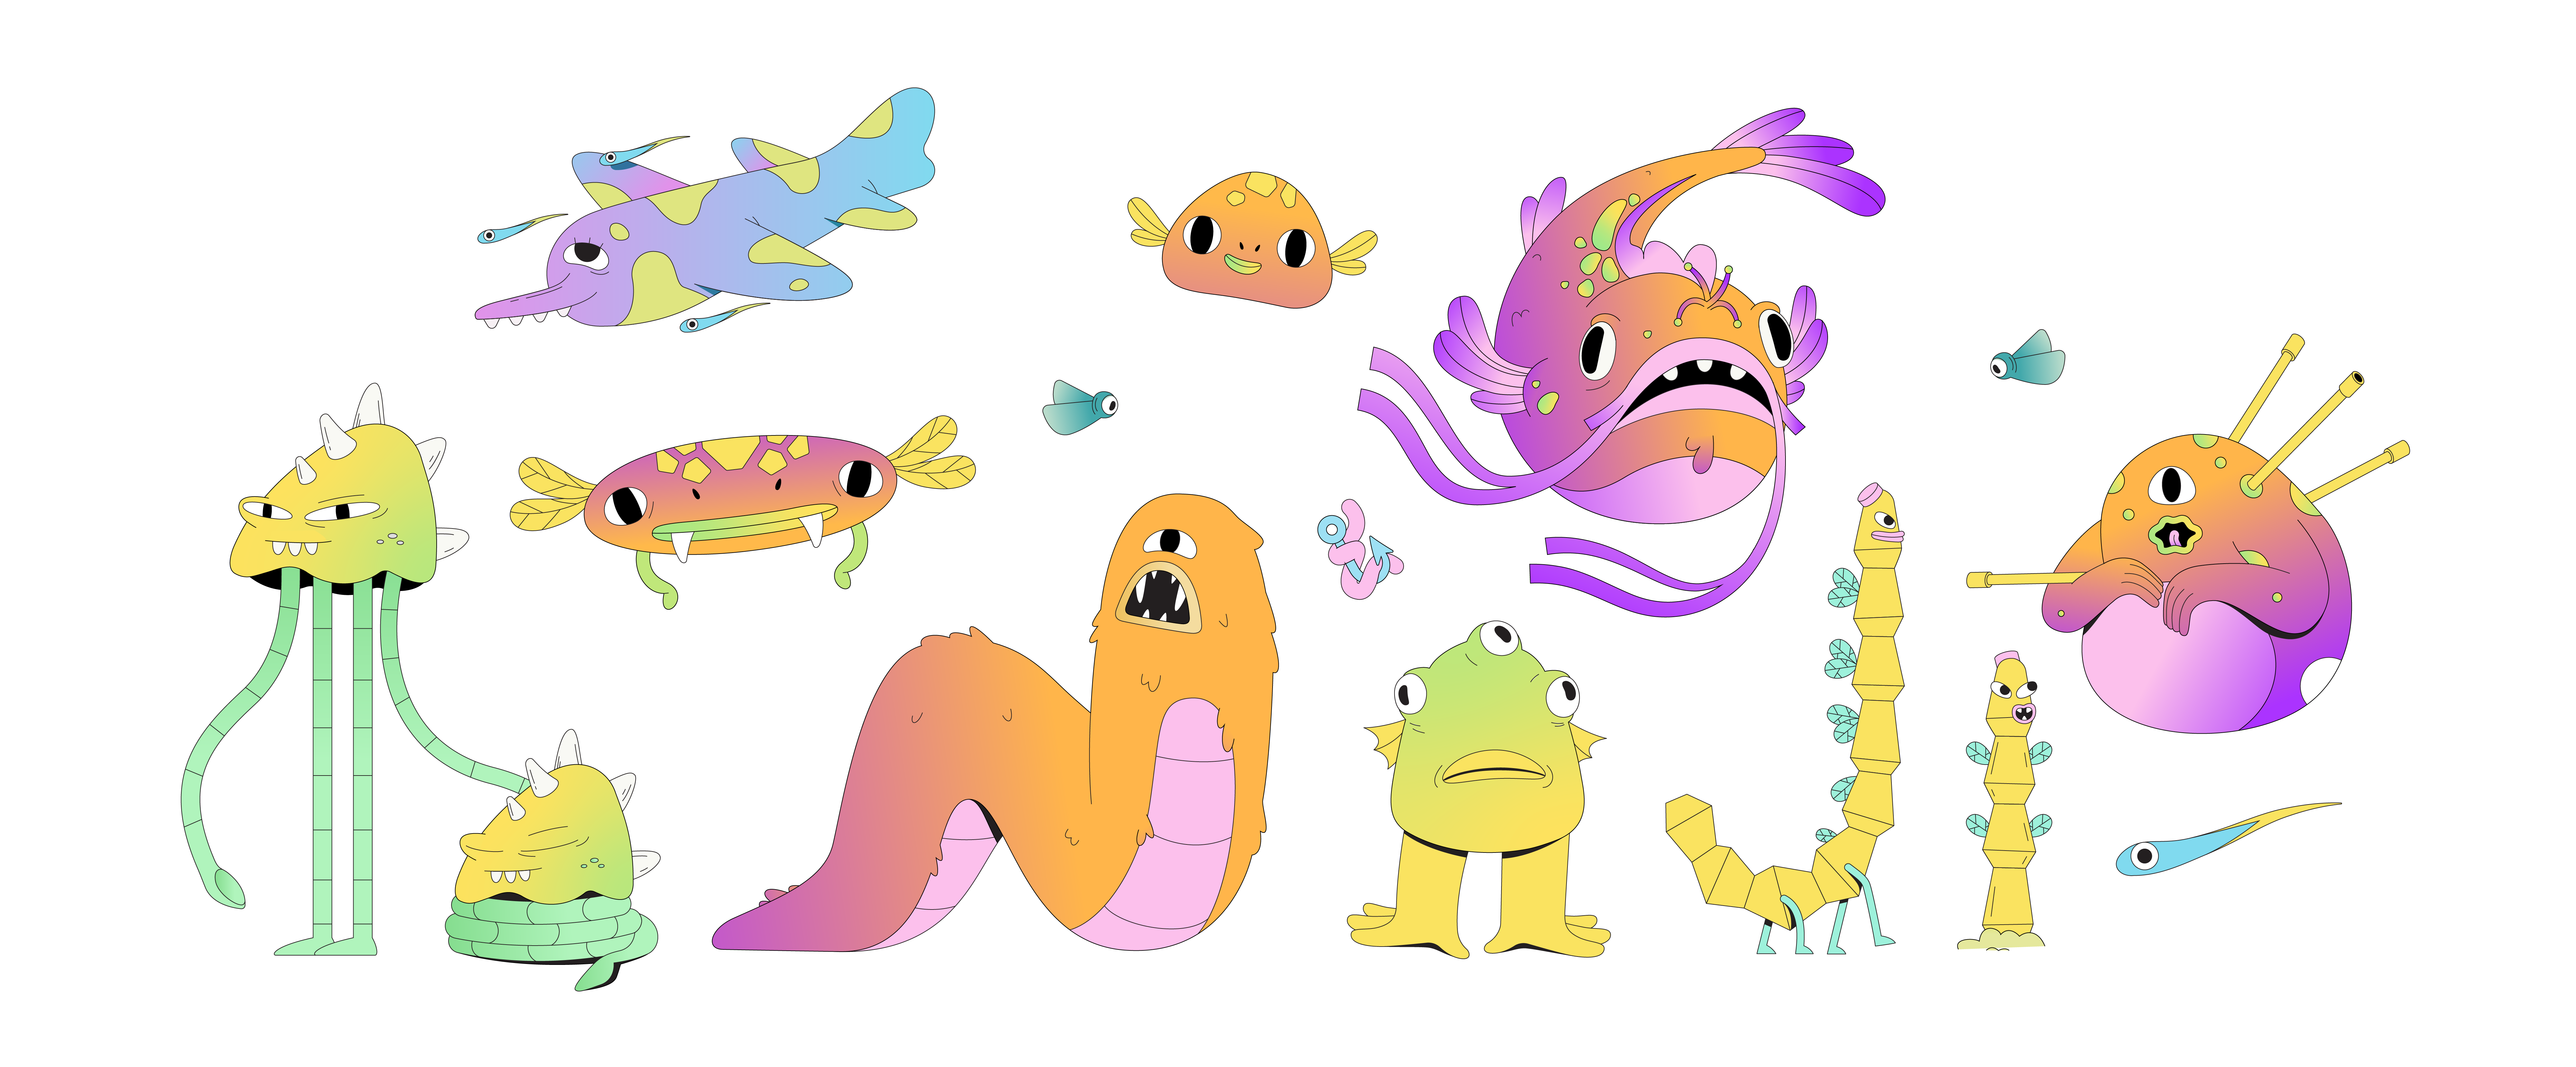 Characters from the Voquent ad.